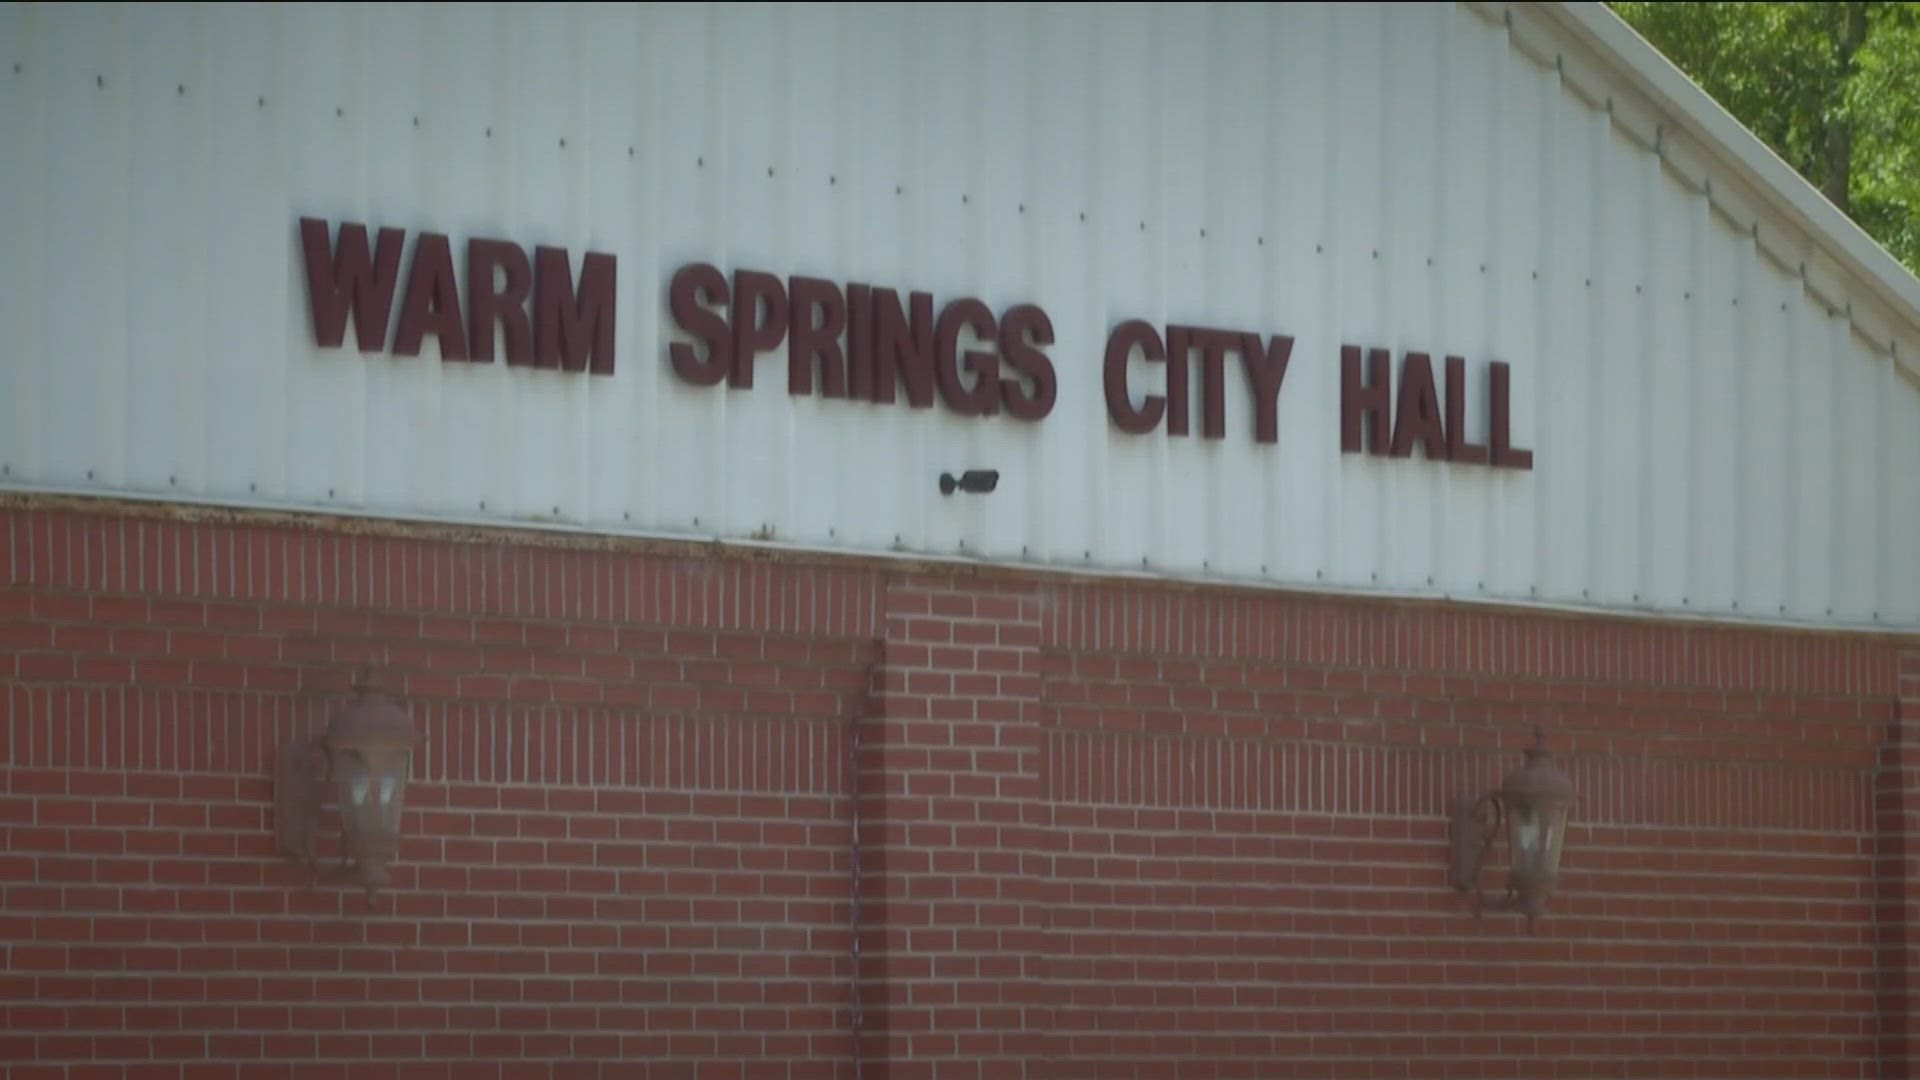 Warm Springs had 13 officers on its staff; 11 were suspended and the police chief was fired.